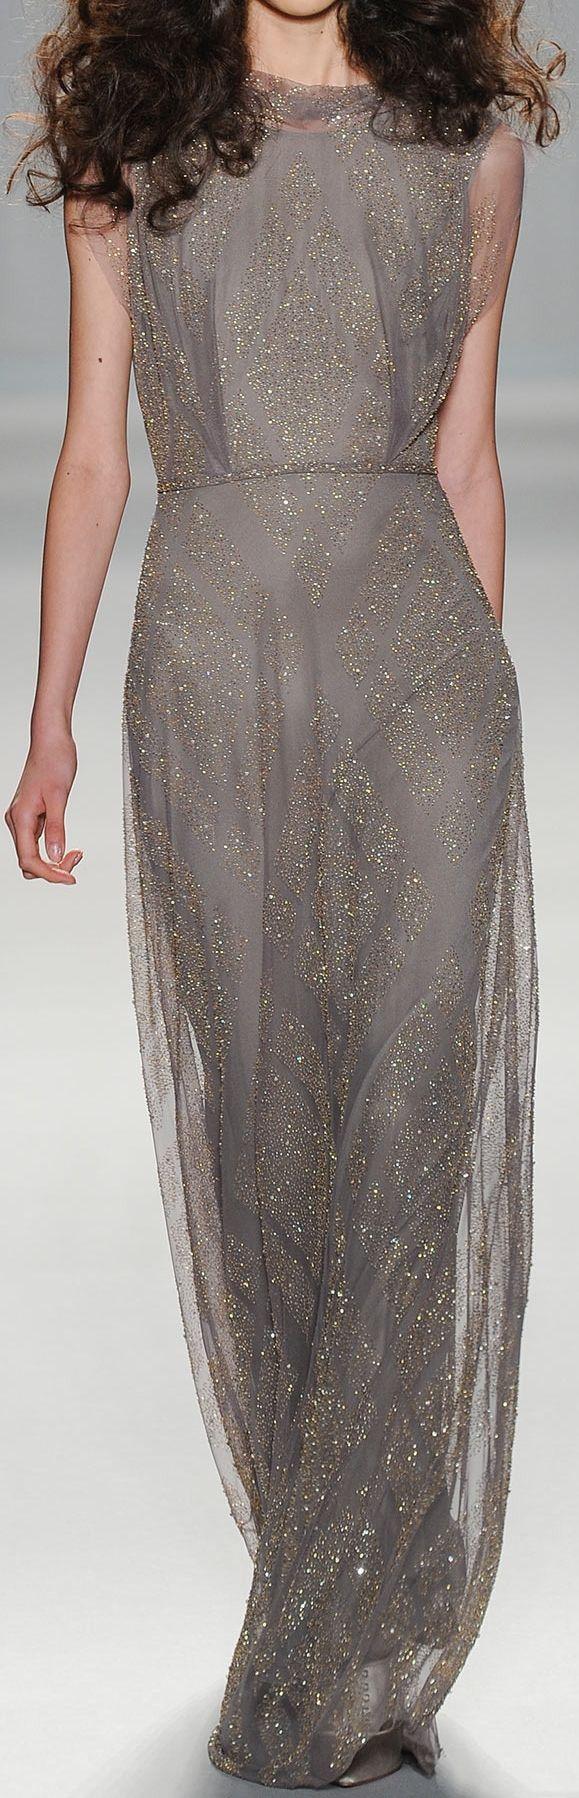 Wedding - Jenny Packham Spring 2014 Ready-to-Wear Fashion Show: Complete Collection